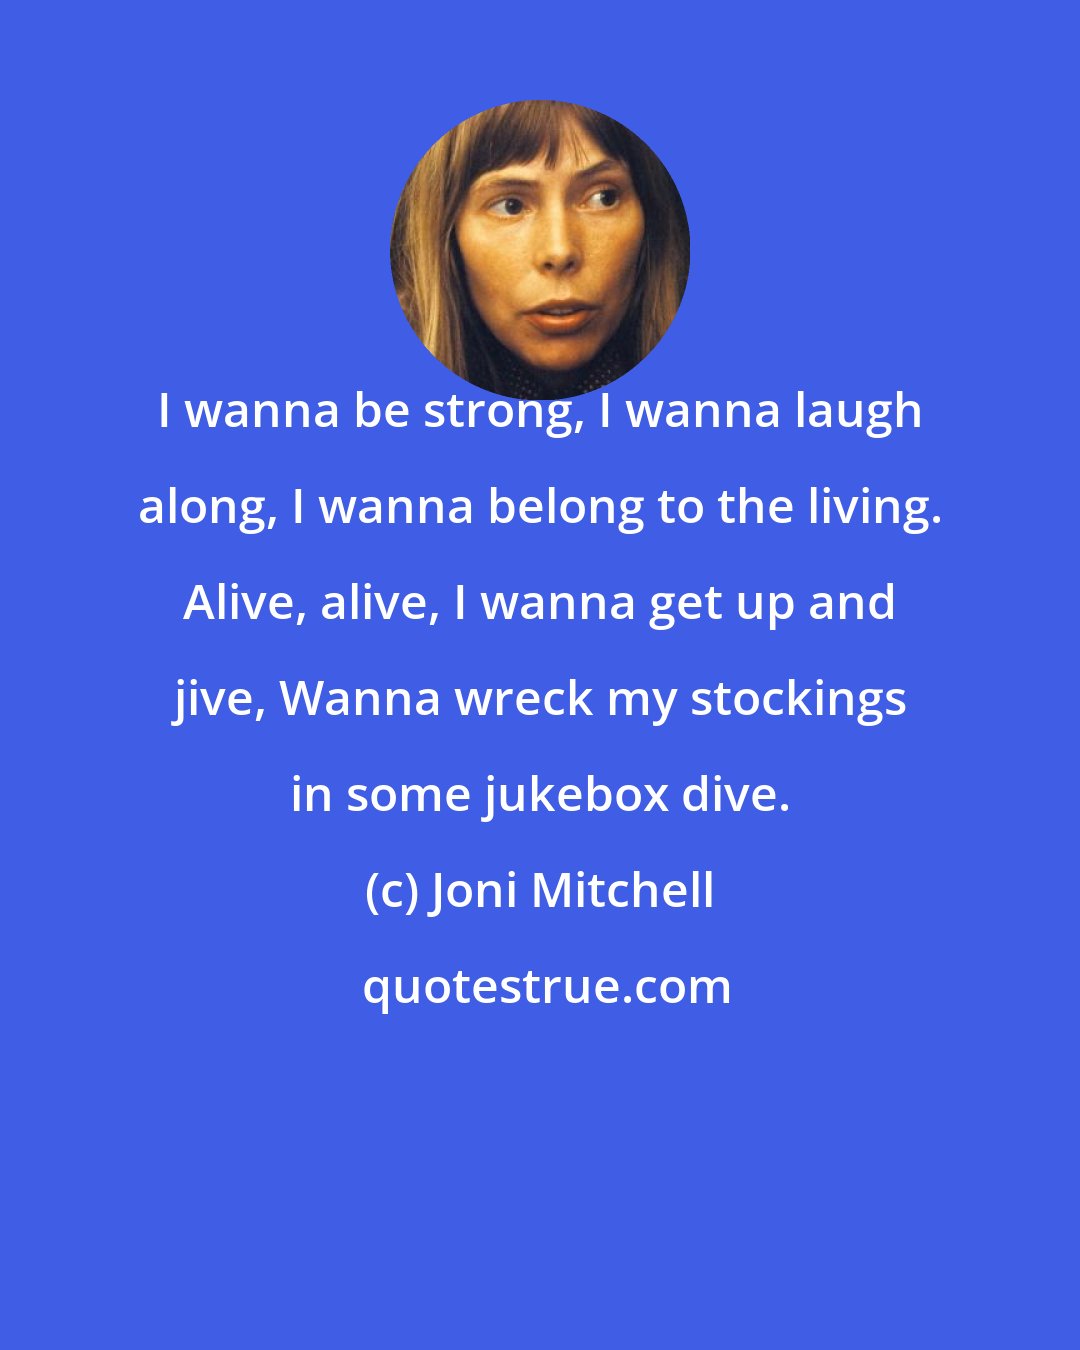 Joni Mitchell: I wanna be strong, I wanna laugh along, I wanna belong to the living. Alive, alive, I wanna get up and jive, Wanna wreck my stockings in some jukebox dive.